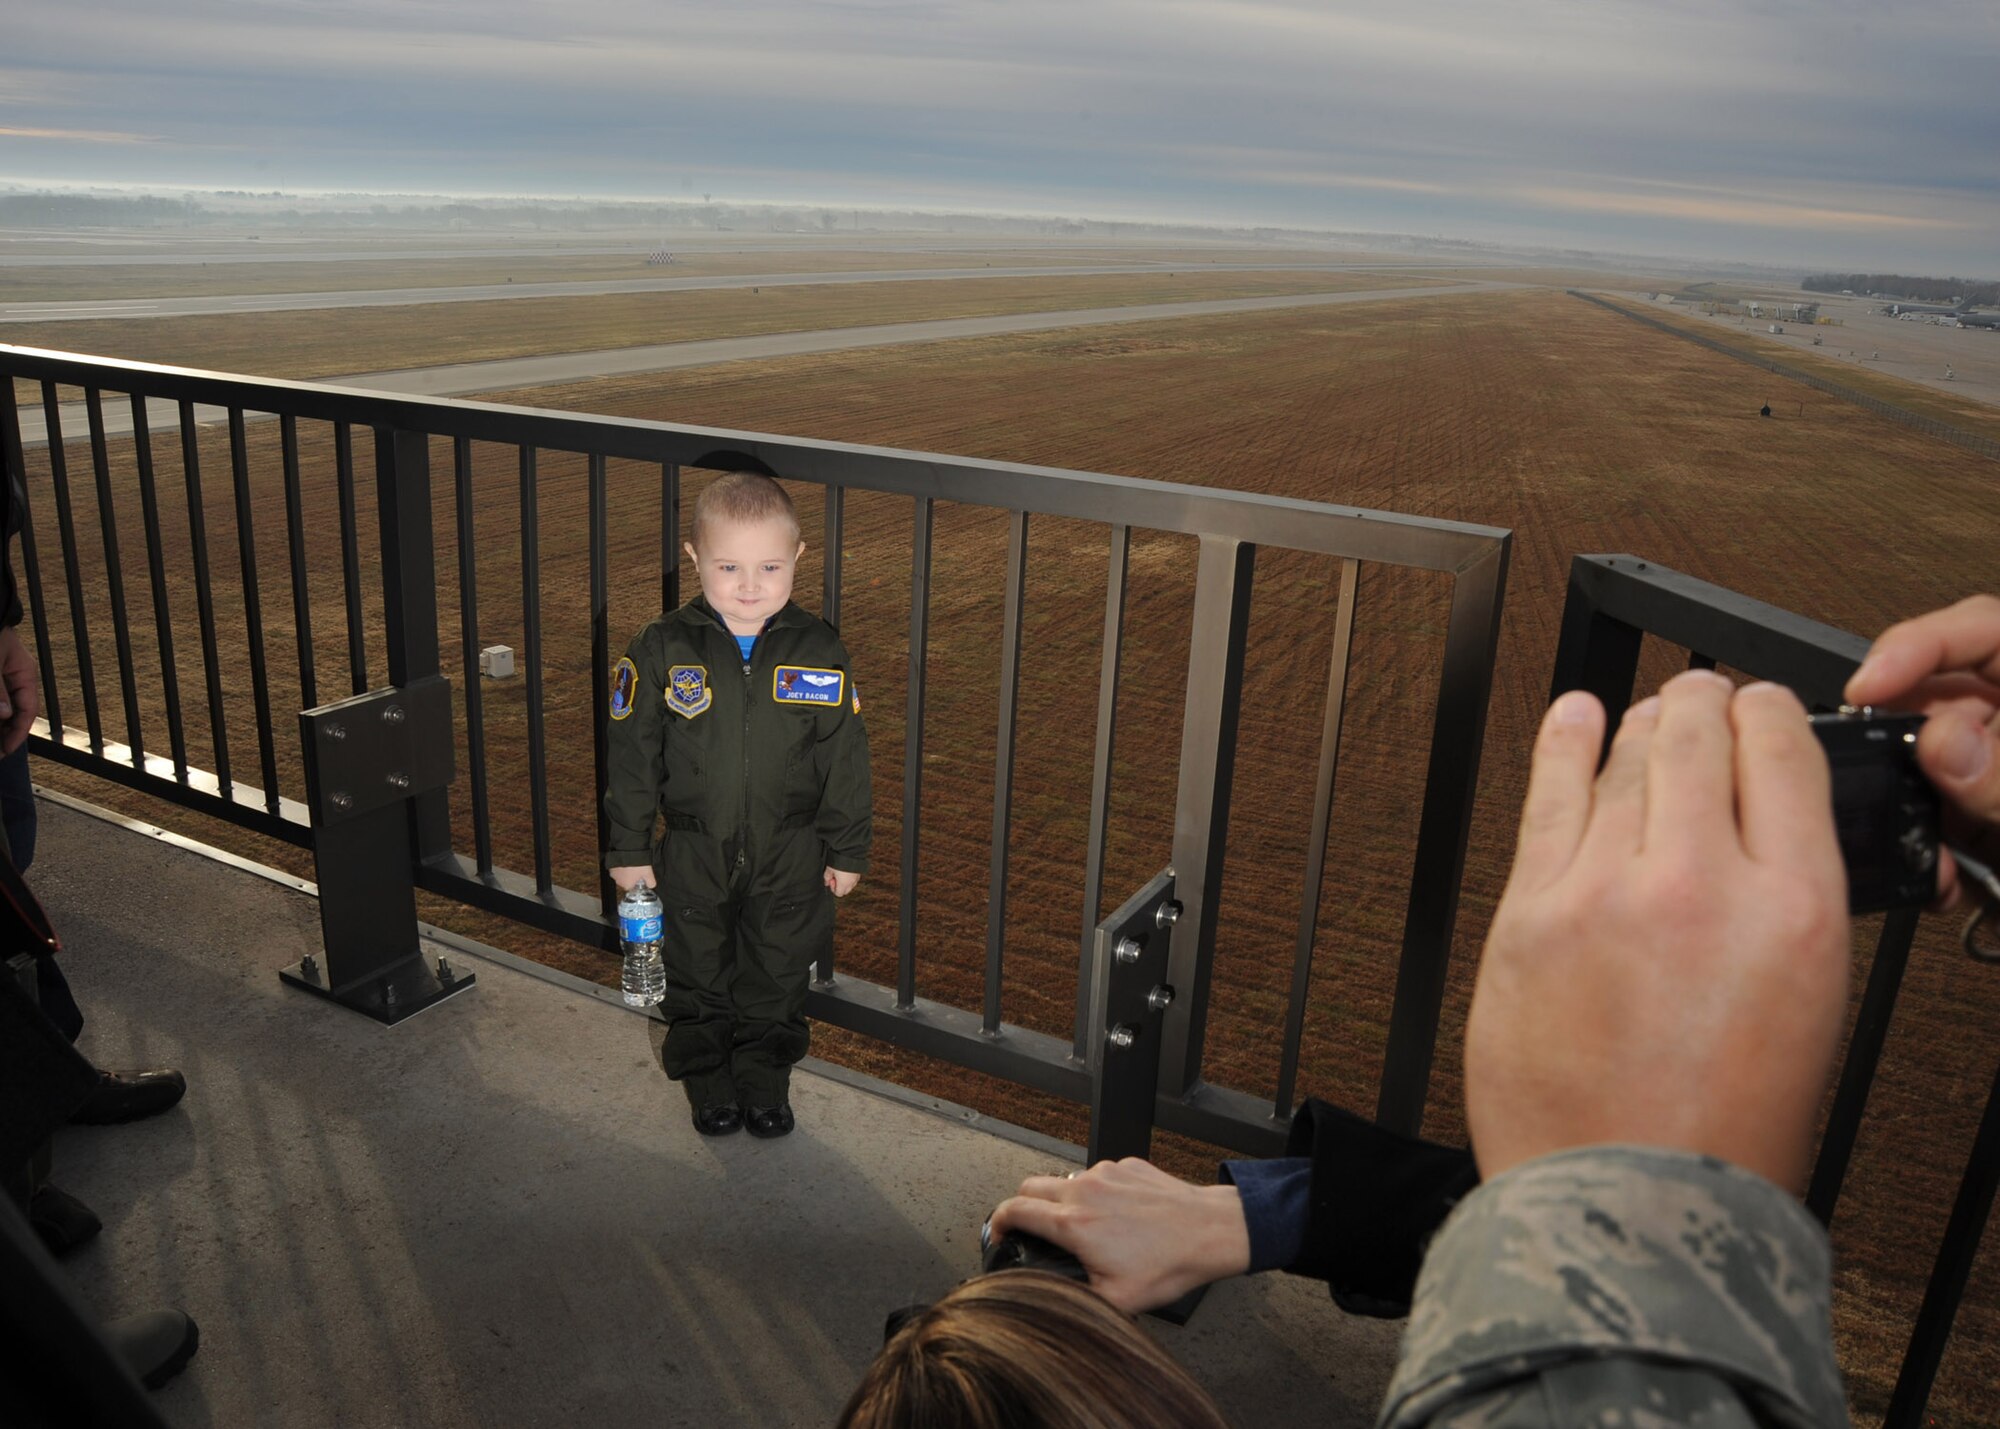 Five-year-old Joey Bacon, Pilot For a Day recipient, poses for photographs at the air traffic control tower catwalk Dec. 10, 2010, McConnell Air Force Base, Kan. Joey, who was diagnosed with leukemia, was invited to the base by members of the 22nd Operations Support Squadron as part of the Pilot For a Day program, an Air Force program that allows medically-challenged youth a chance to visit a base and become part of the Air Force team. (U.S. Air Force photo/Staff Sgt. Dallas Edwards)